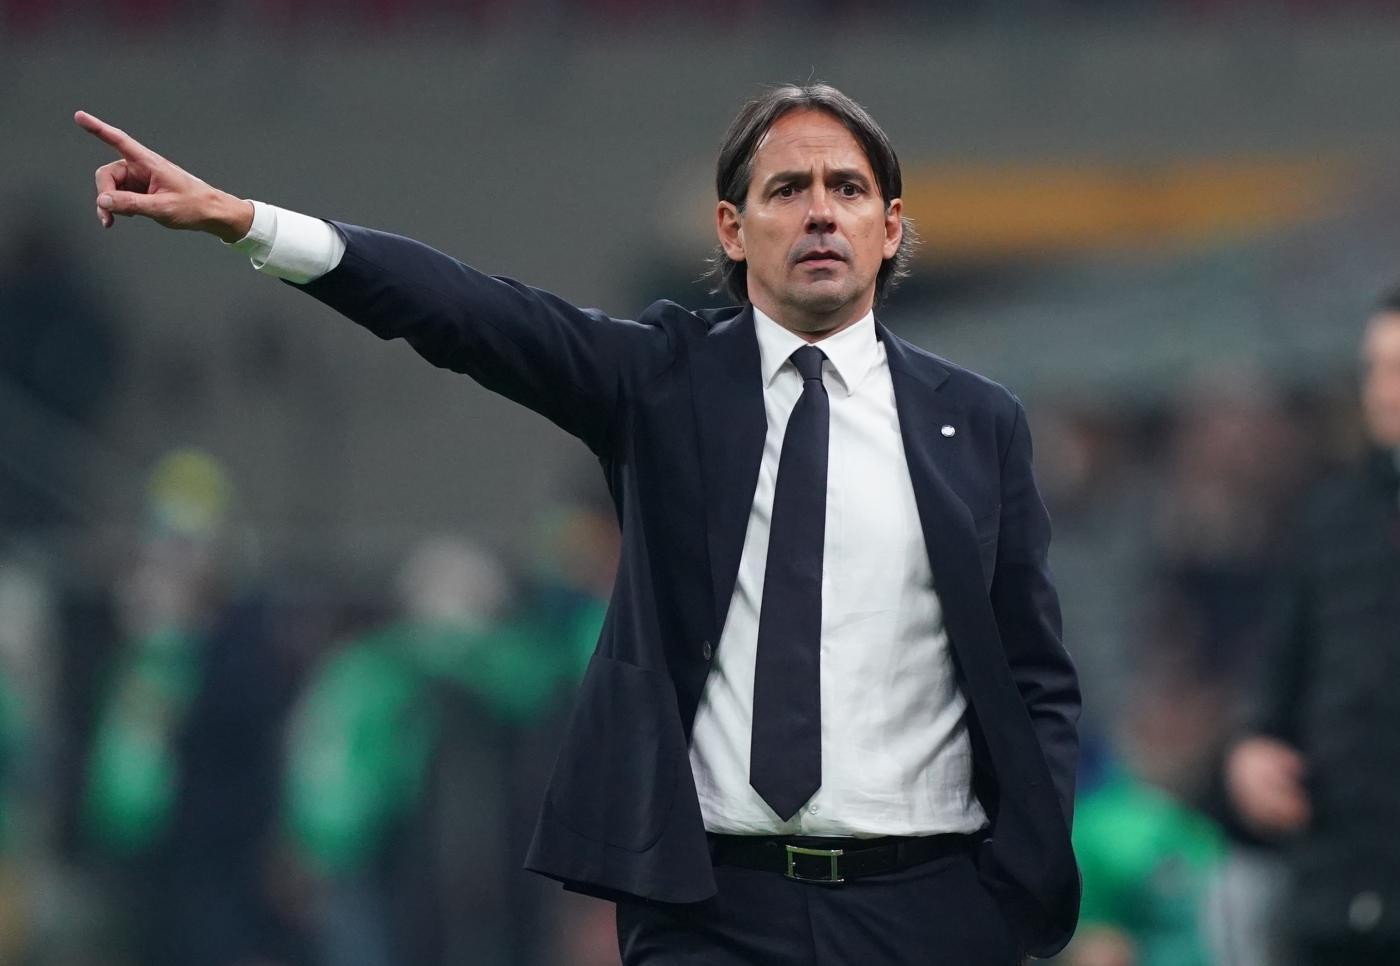 INZAGHI: “IT WASN’T EASY TO PERFORM LIKE THAT. THIS TEAM DOESN’T GIVE IN”